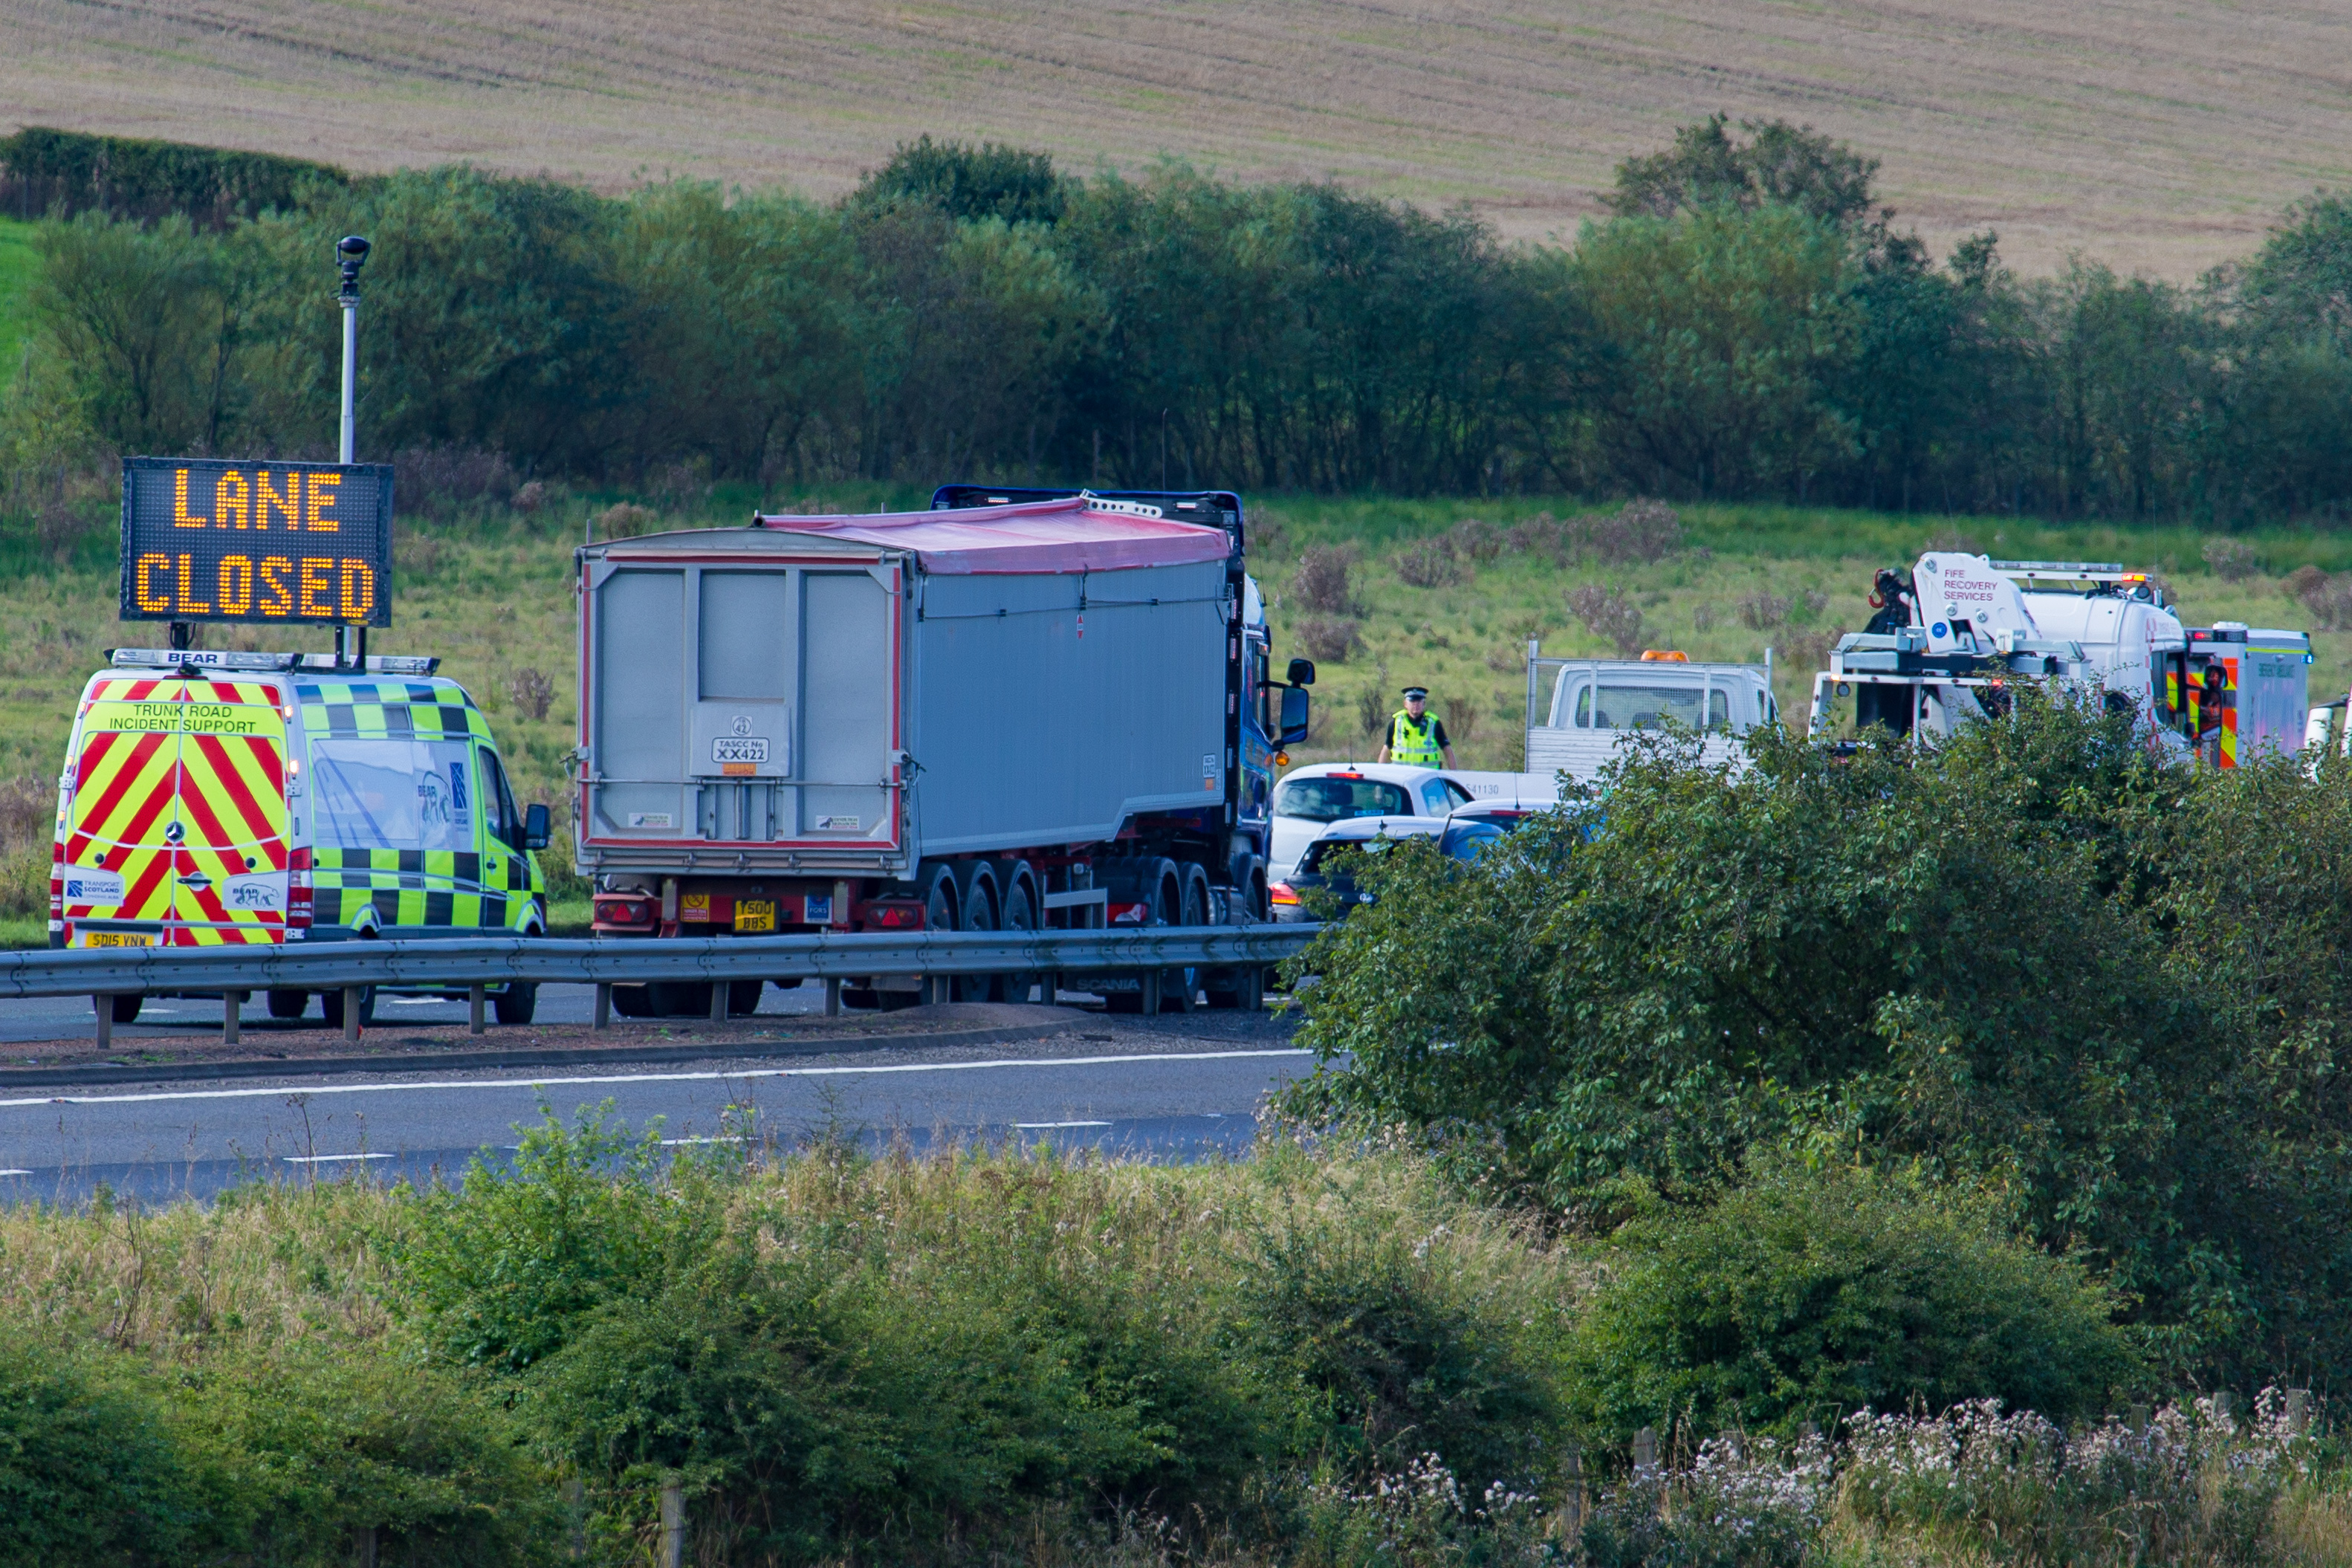 The accident caused long tailbacks on the A92